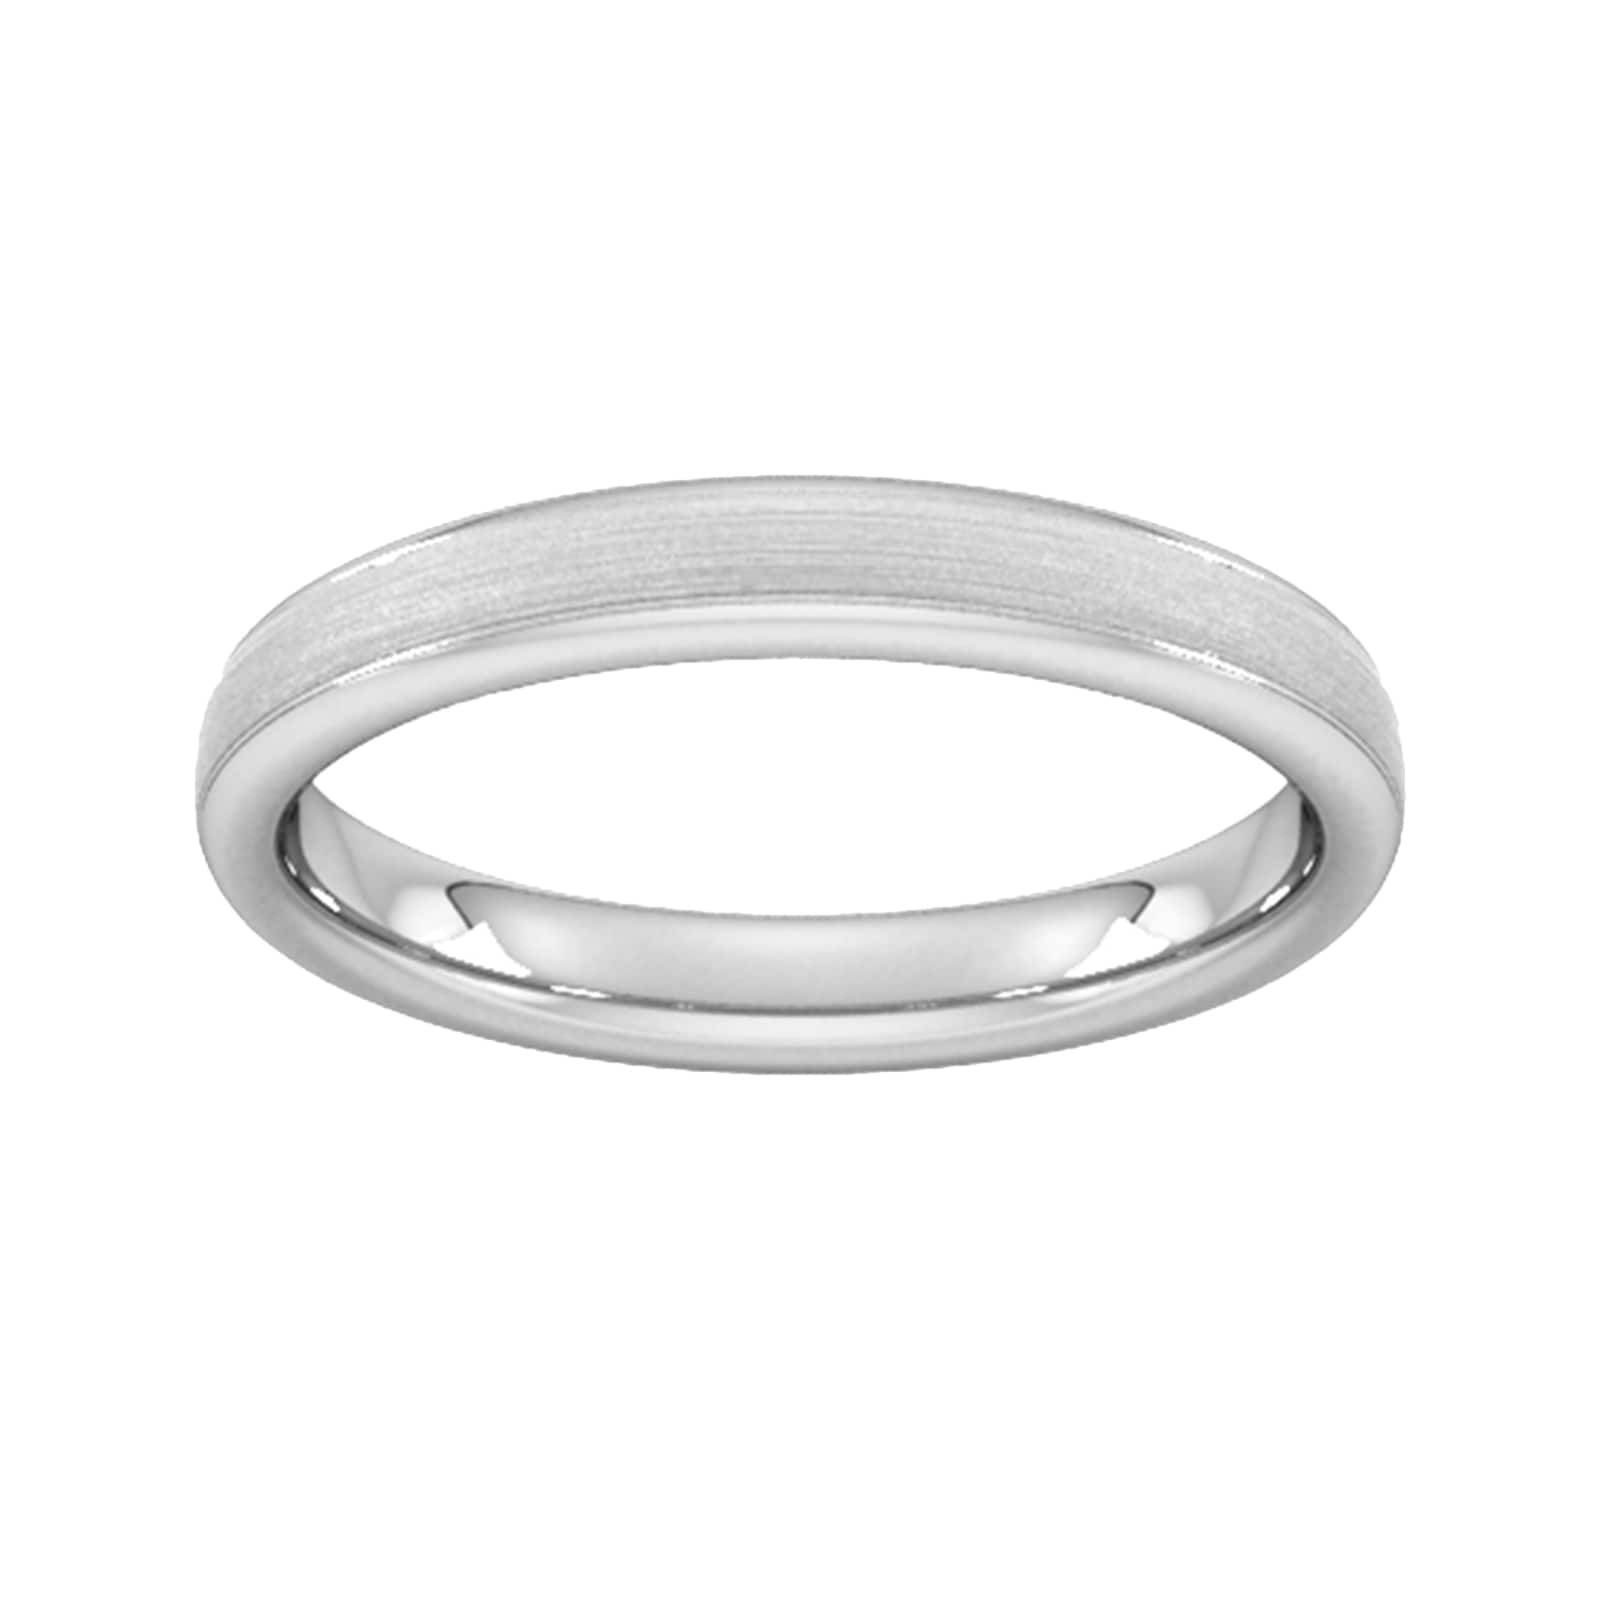 3mm Flat Court Heavy Matt Centre With Grooves Wedding Ring In 950 Palladium - Ring Size G